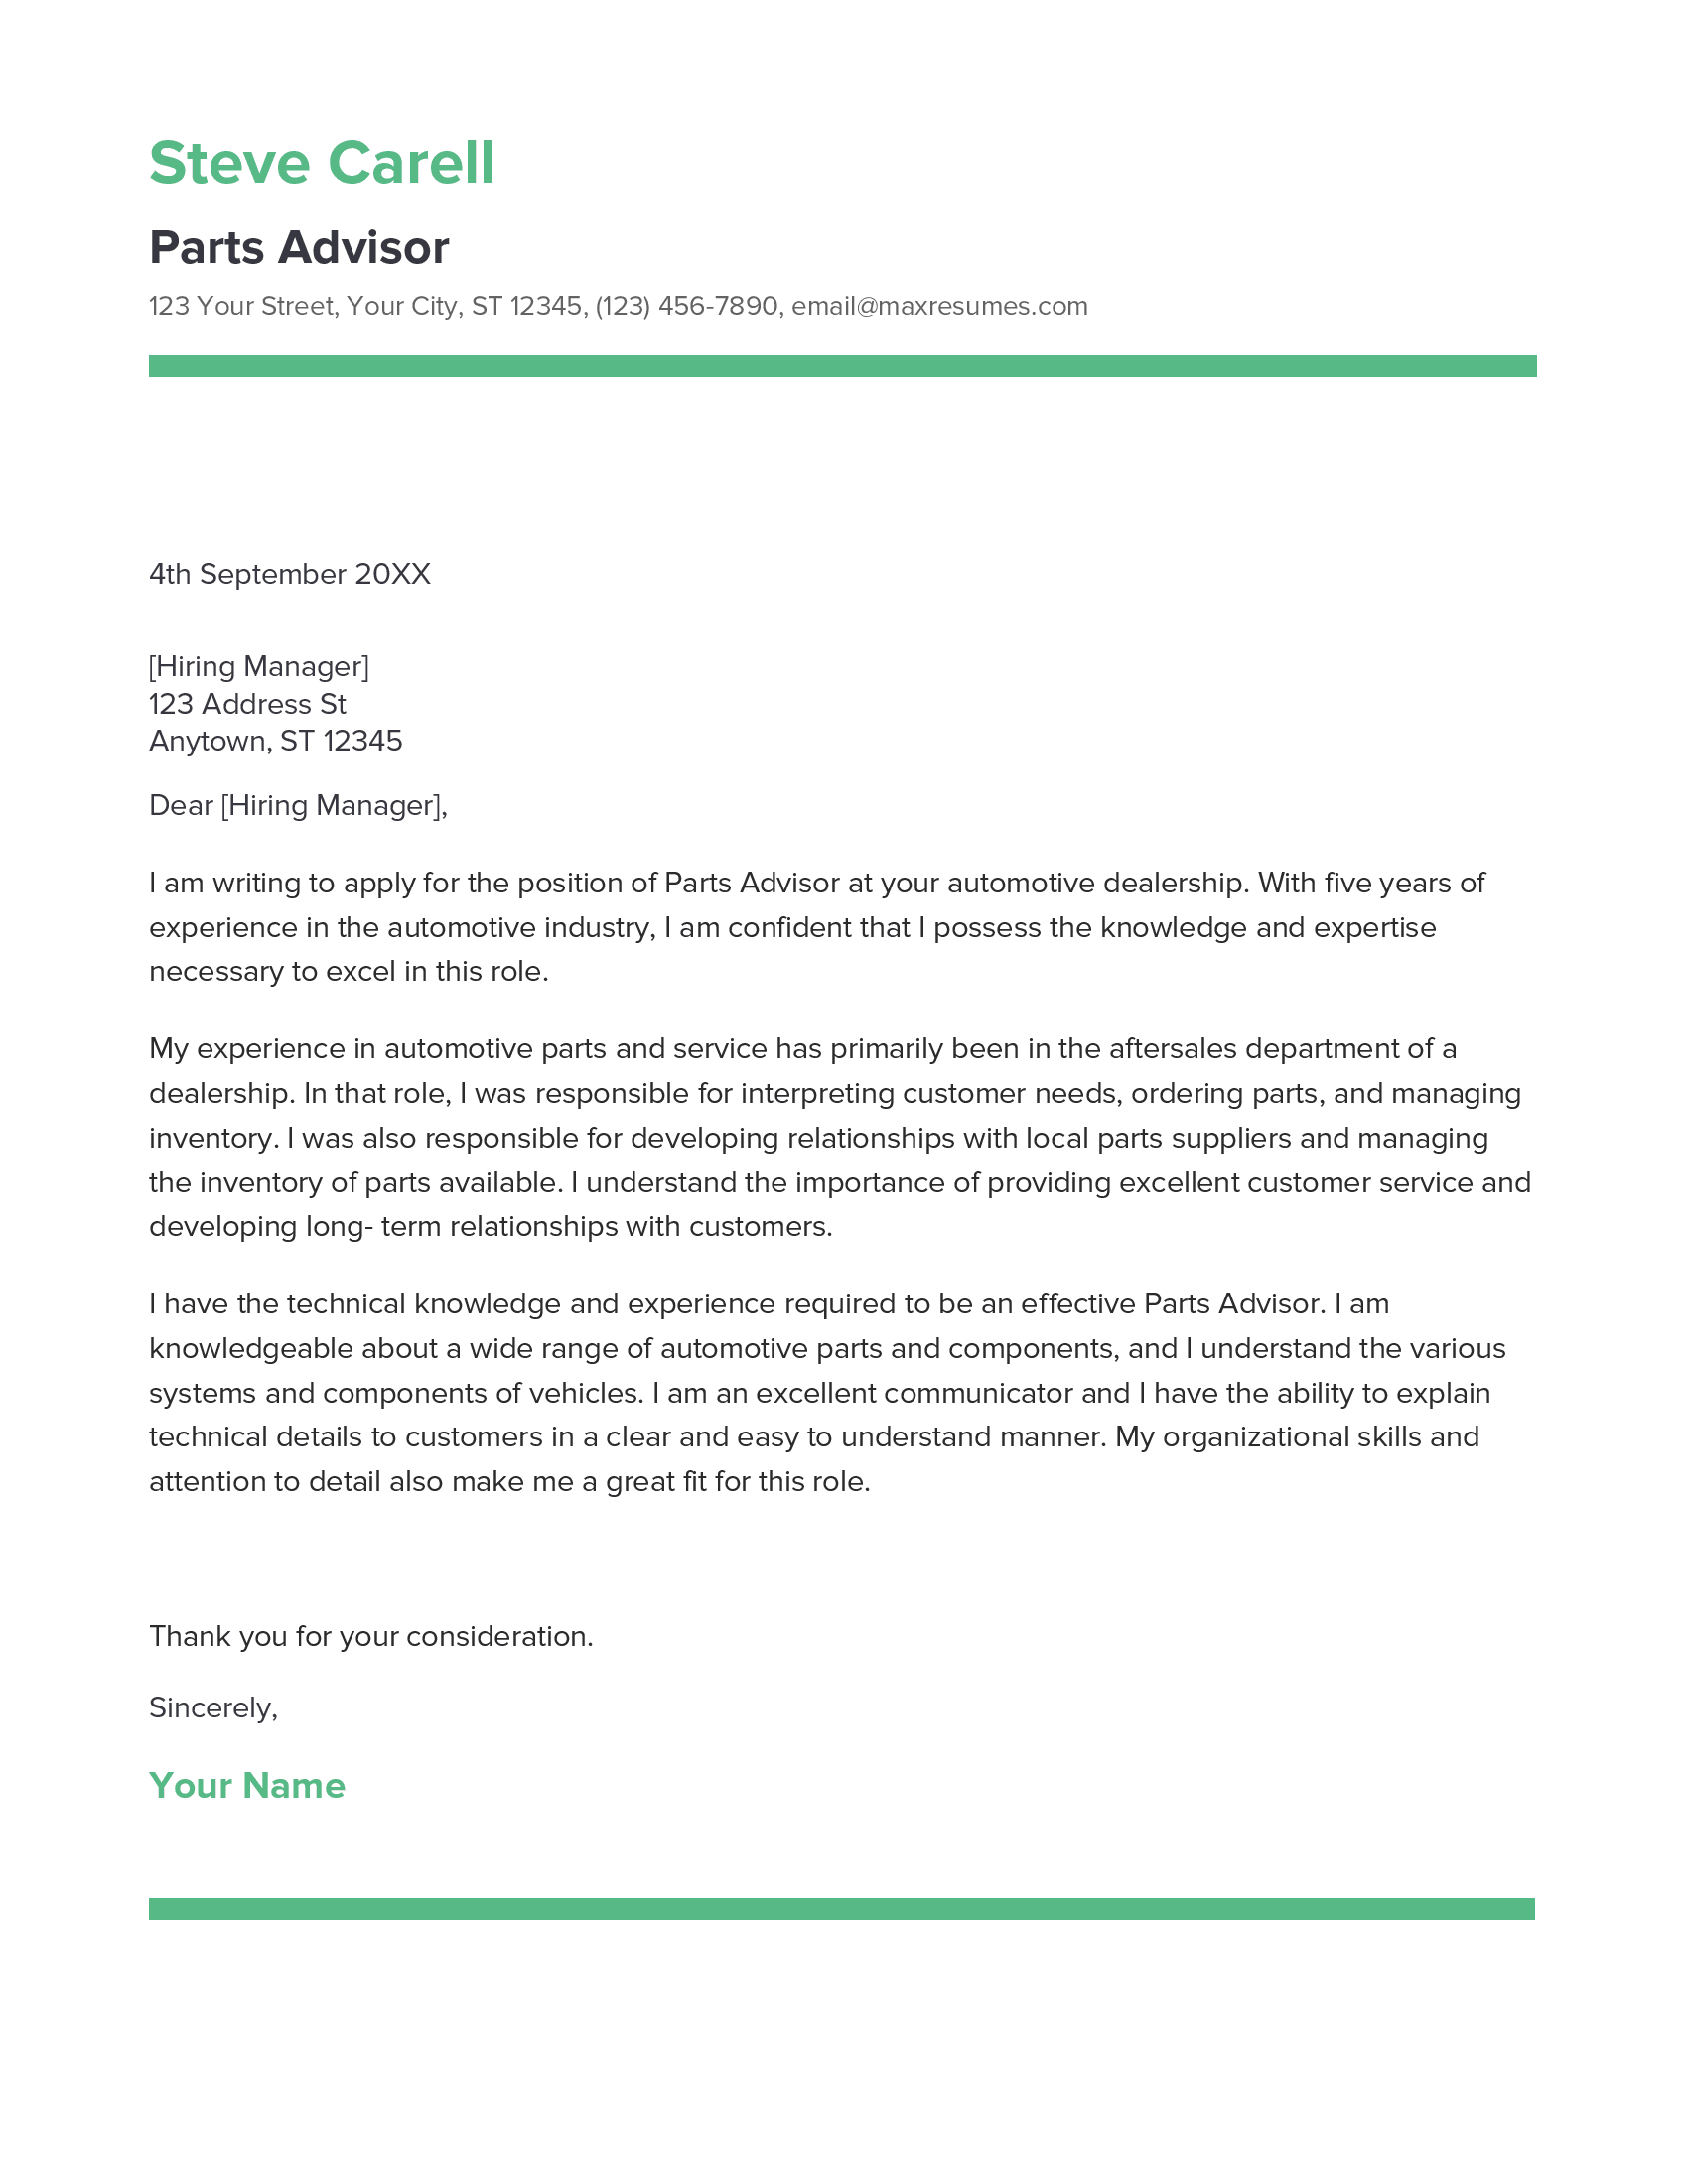 Parts Advisor Cover Letter Example